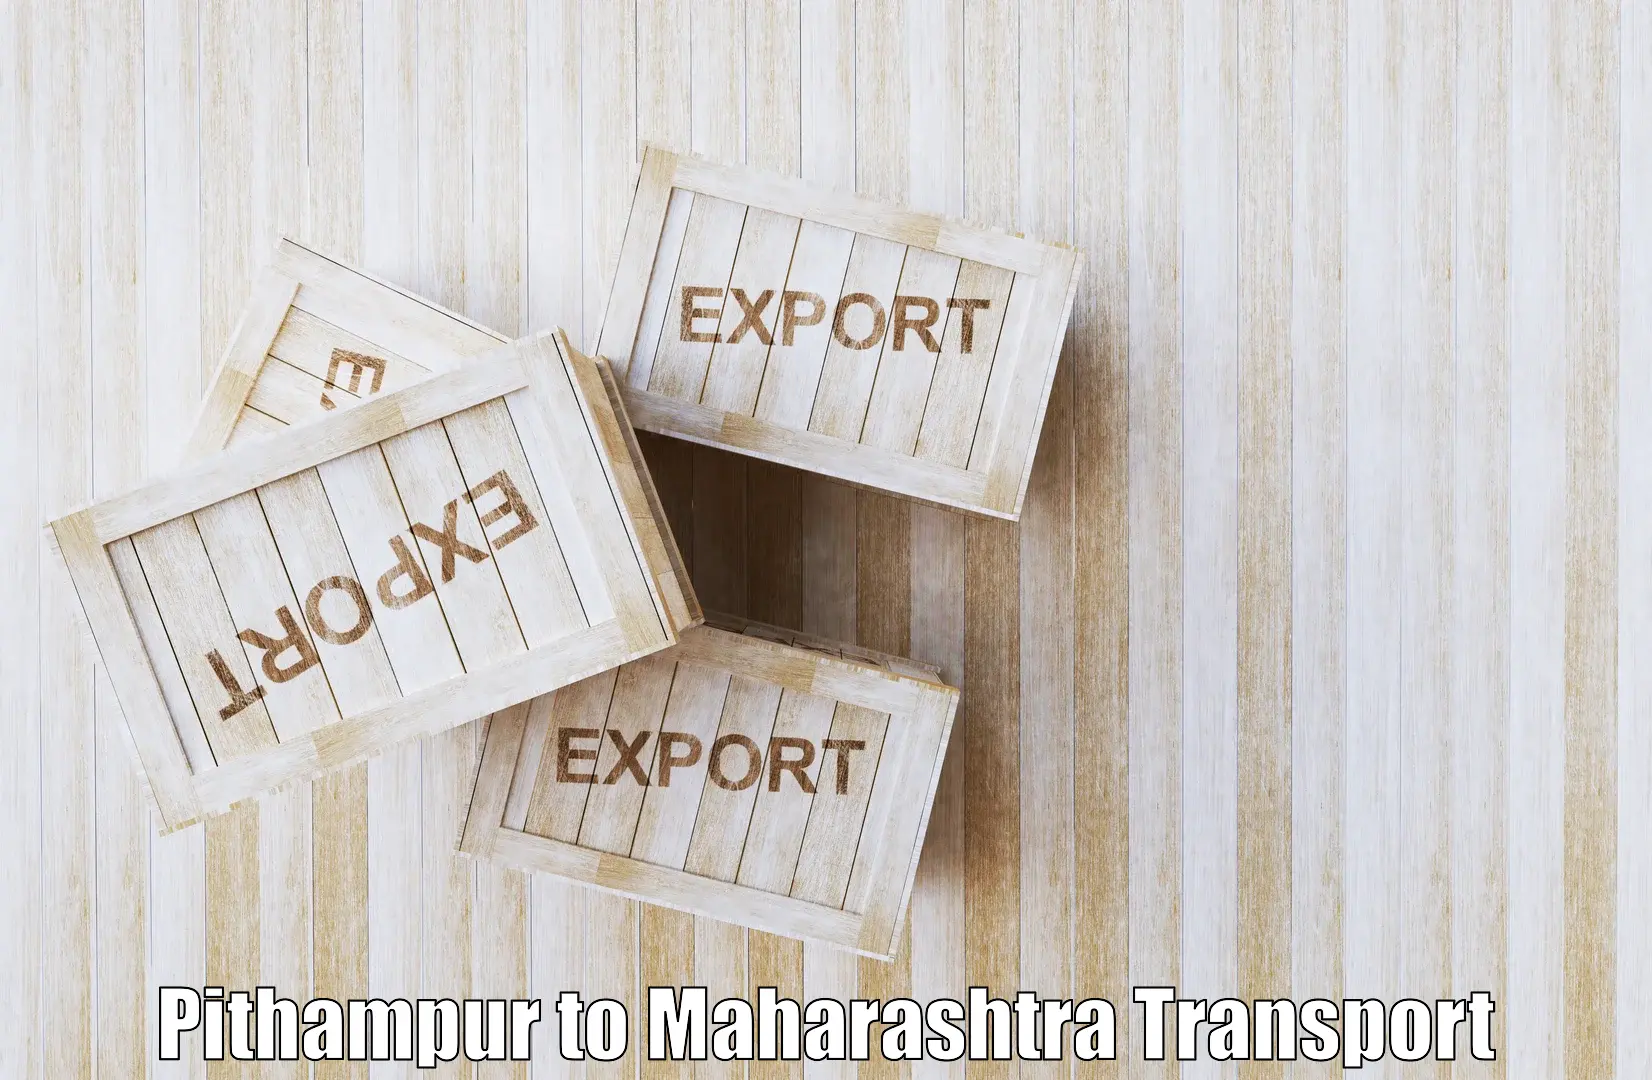 Goods delivery service Pithampur to Bhandara